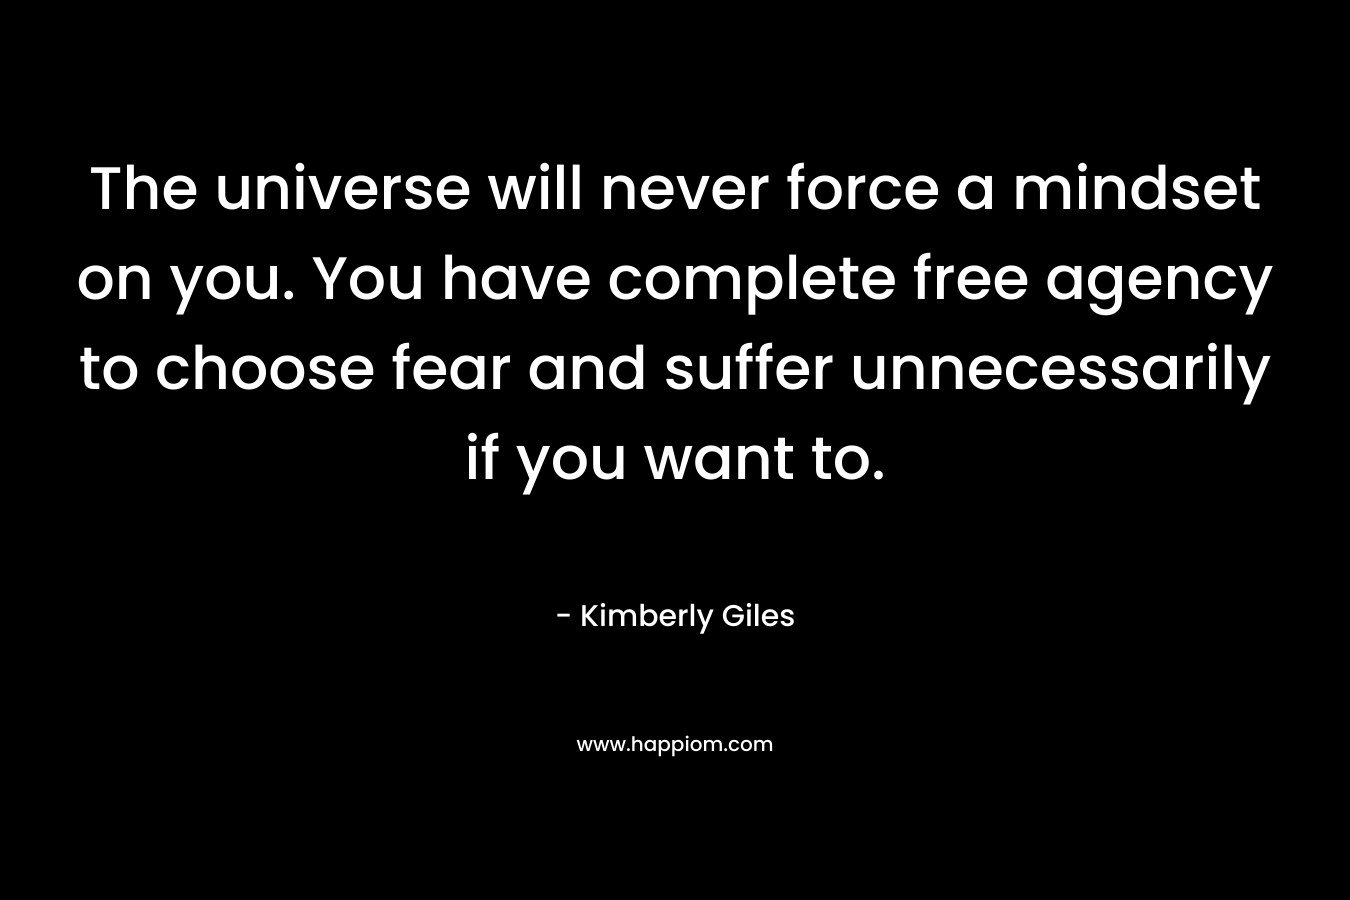 The universe will never force a mindset on you. You have complete free agency to choose fear and suffer unnecessarily if you want to.